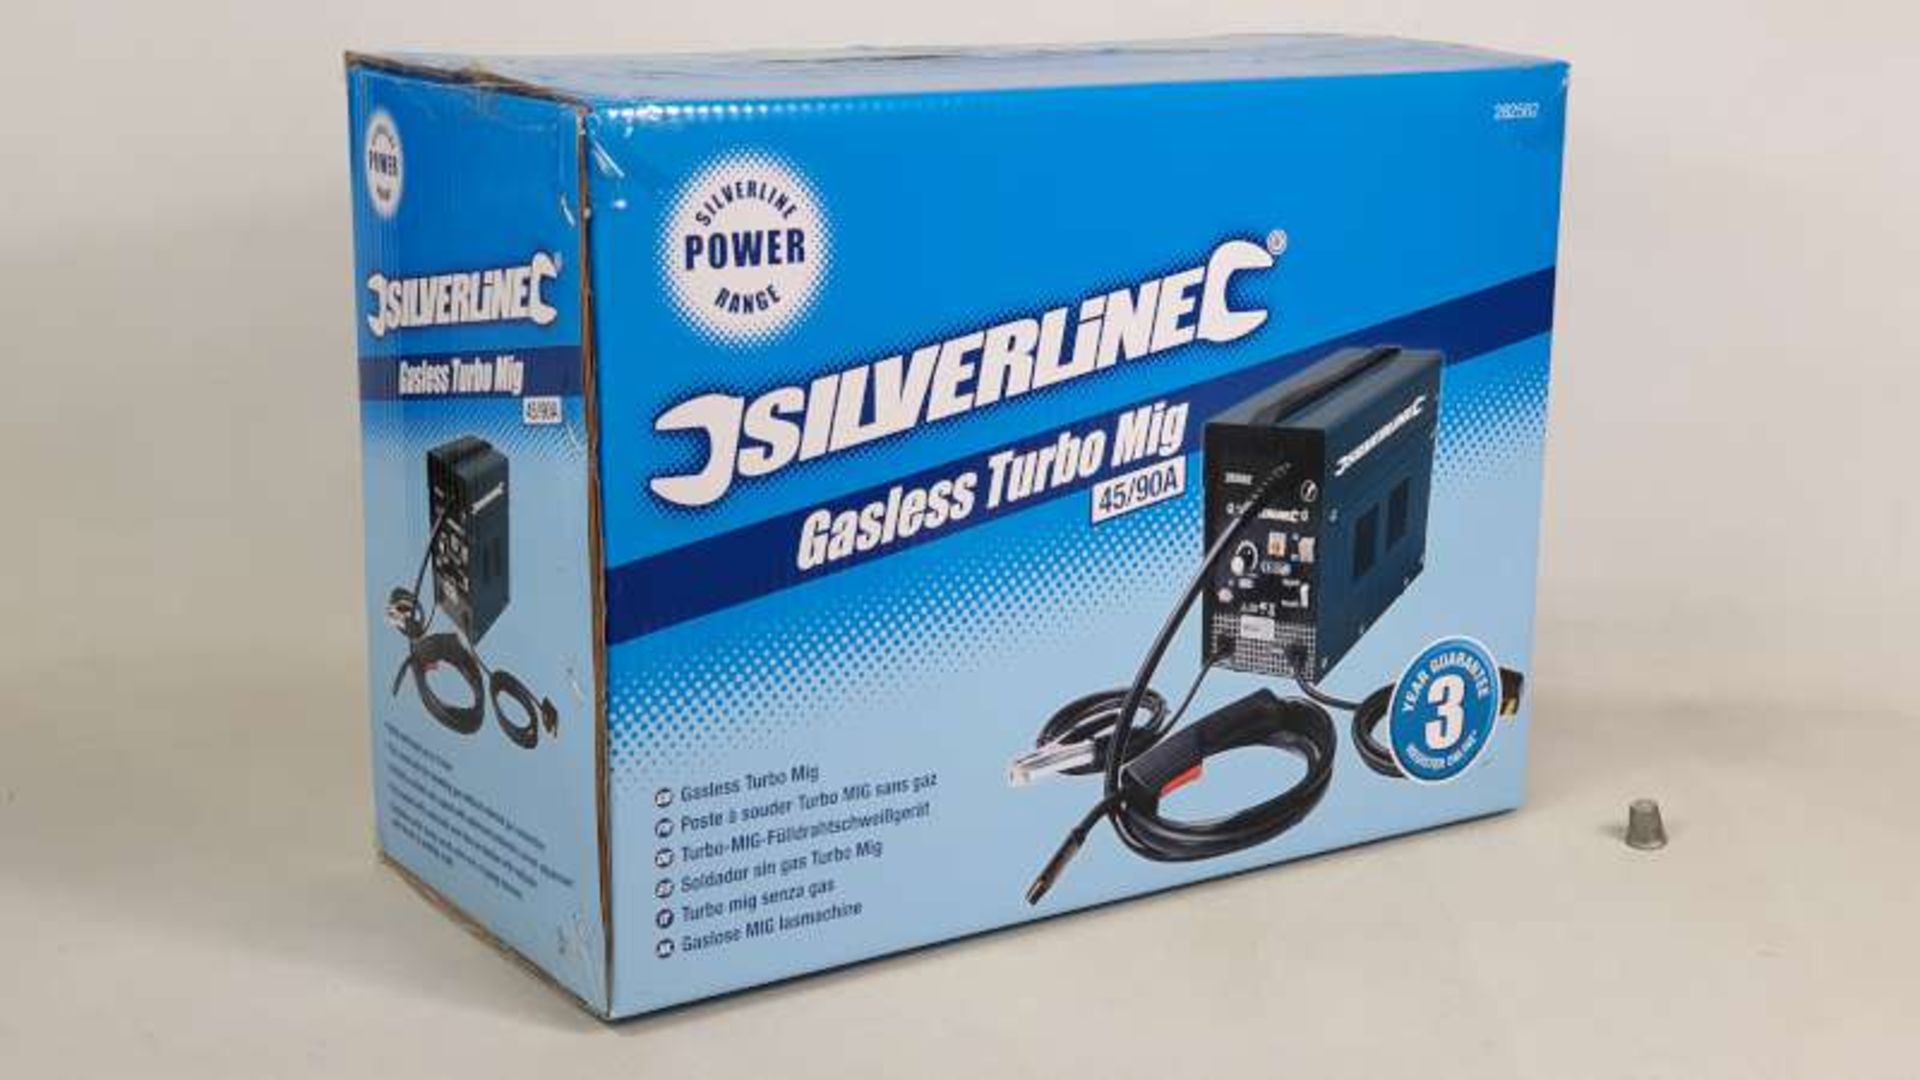 BRAND NEW BOXED SILVERLINE GASLESS TURBO MIG WELDER 45/90A WITH 3 YEAR MANUFACTURERS GUARANTEE